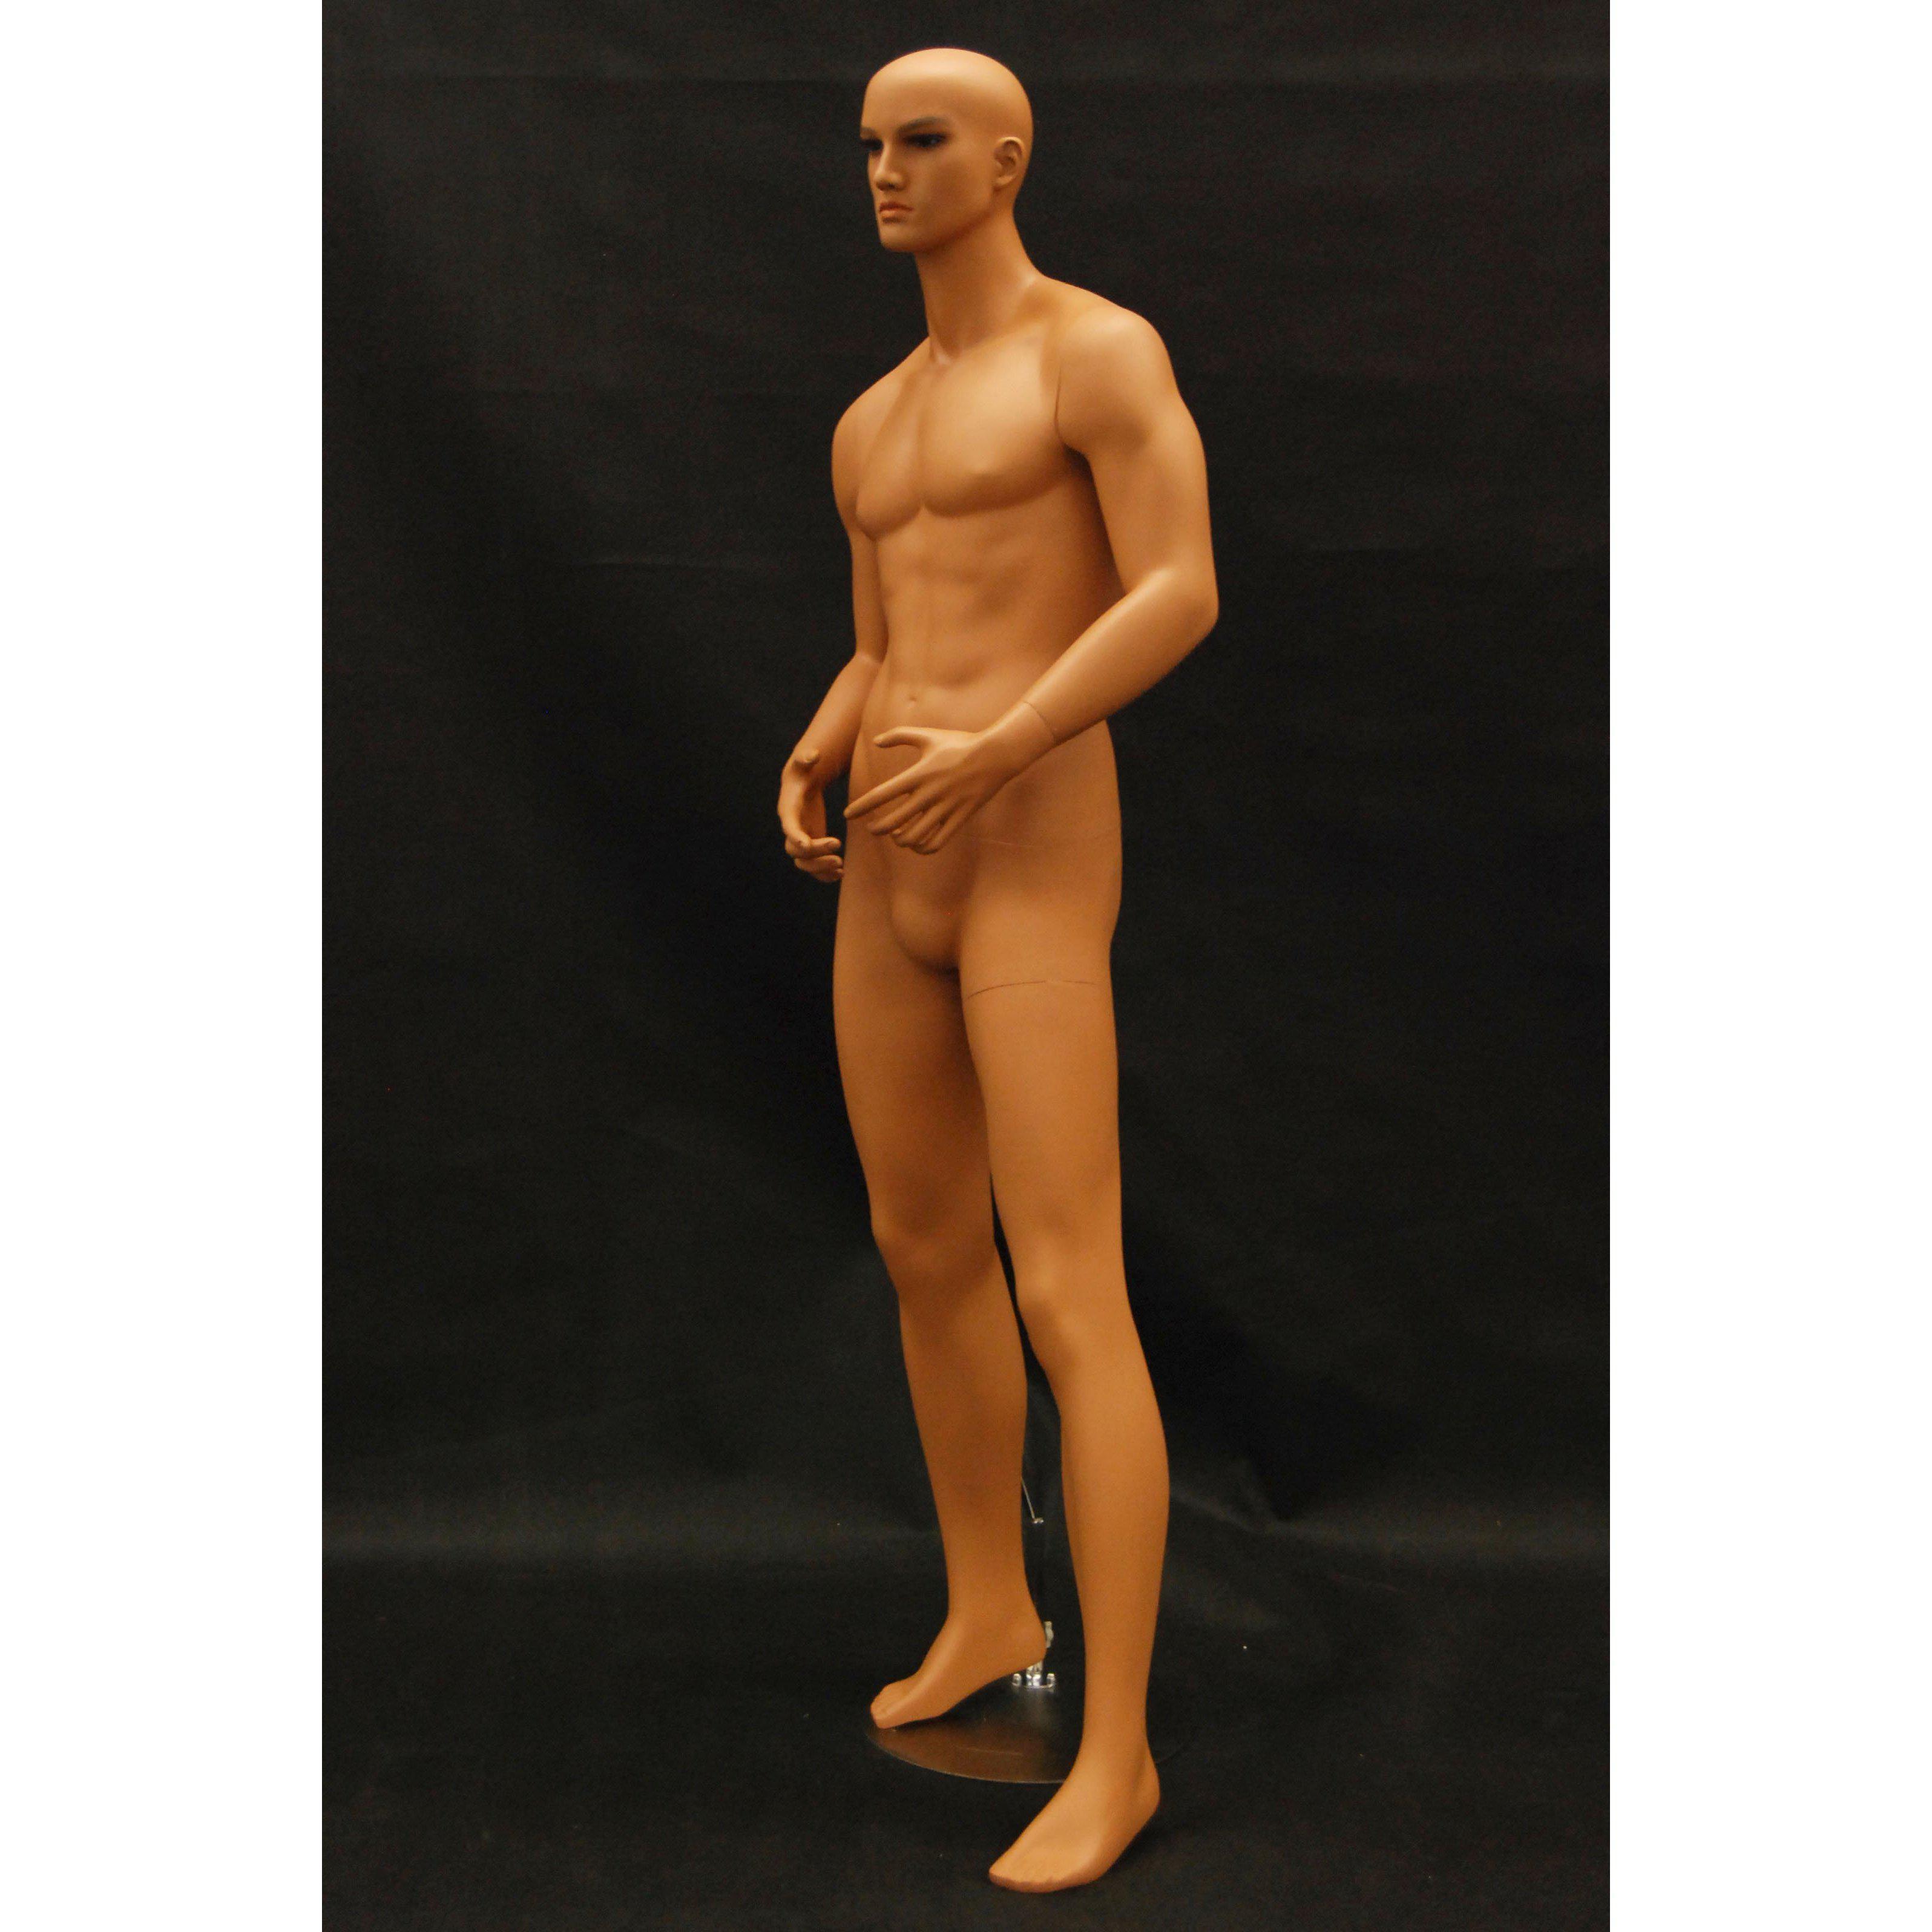 Plus Size Male Invisible Ghost Mannequin Full Body for Photography MM- -  Mannequin Mall